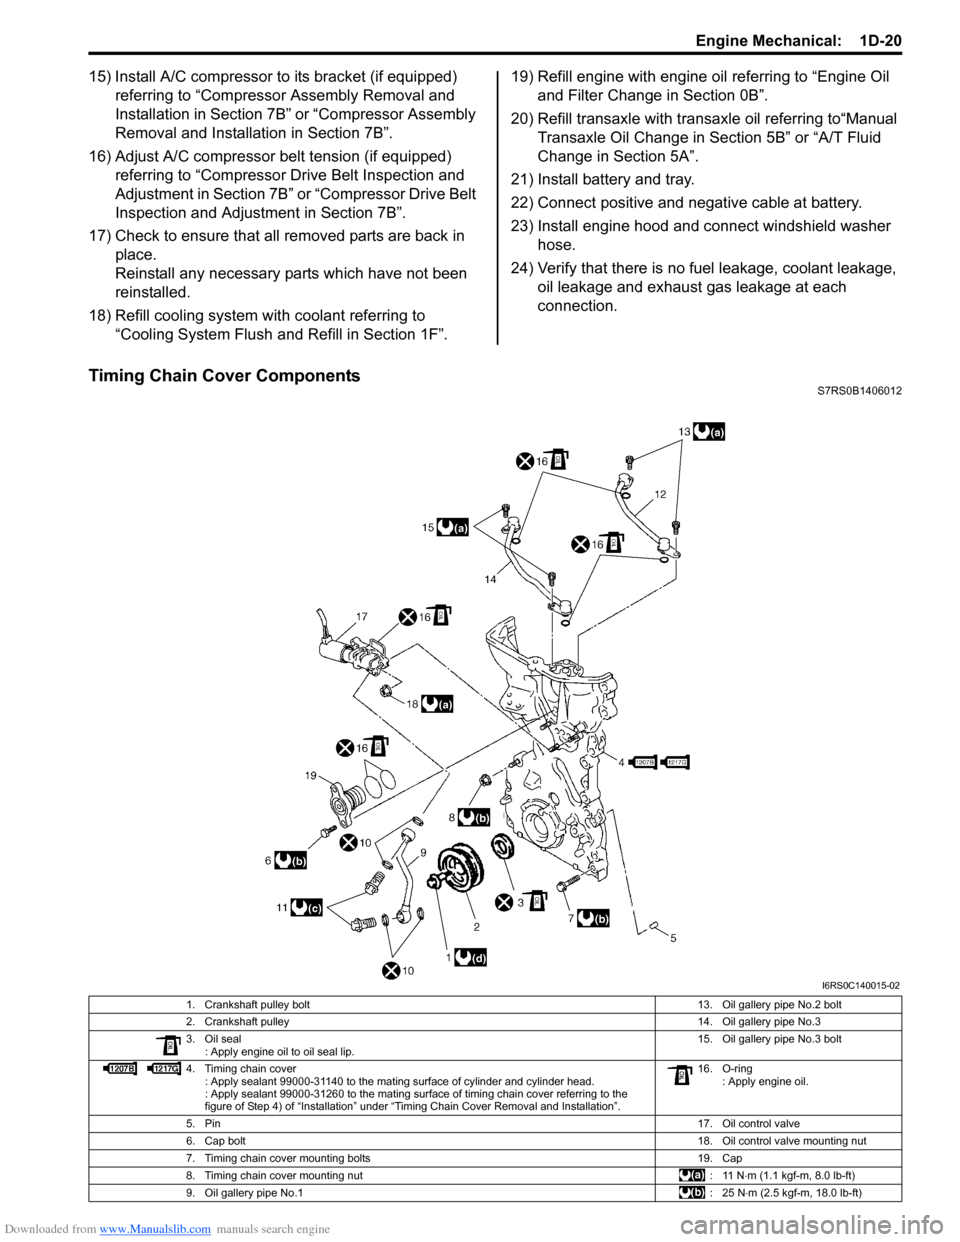 SUZUKI SWIFT 2005 2.G Service Workshop Manual Downloaded from www.Manualslib.com manuals search engine Engine Mechanical:  1D-20
15) Install A/C compressor to its bracket (if equipped) referring to “Compressor Assembly Removal and 
Installation